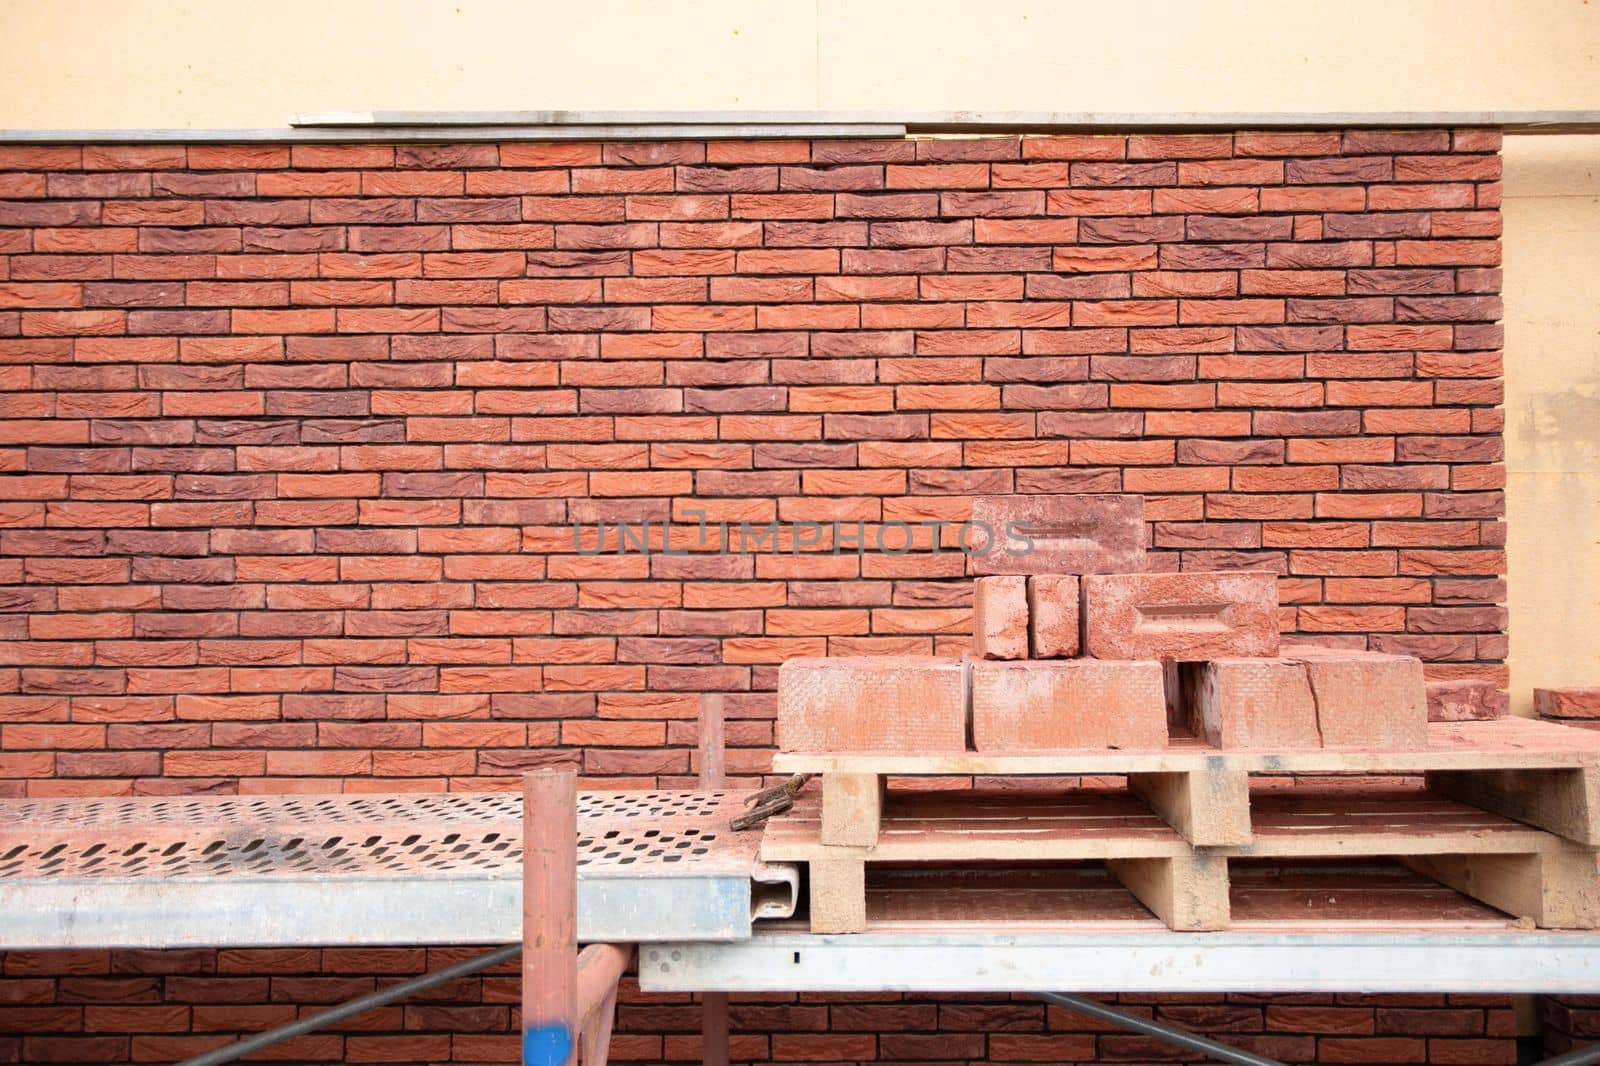 a new House is being built, the beginning of brickwork with red bricks, building by KaterinaDalemans